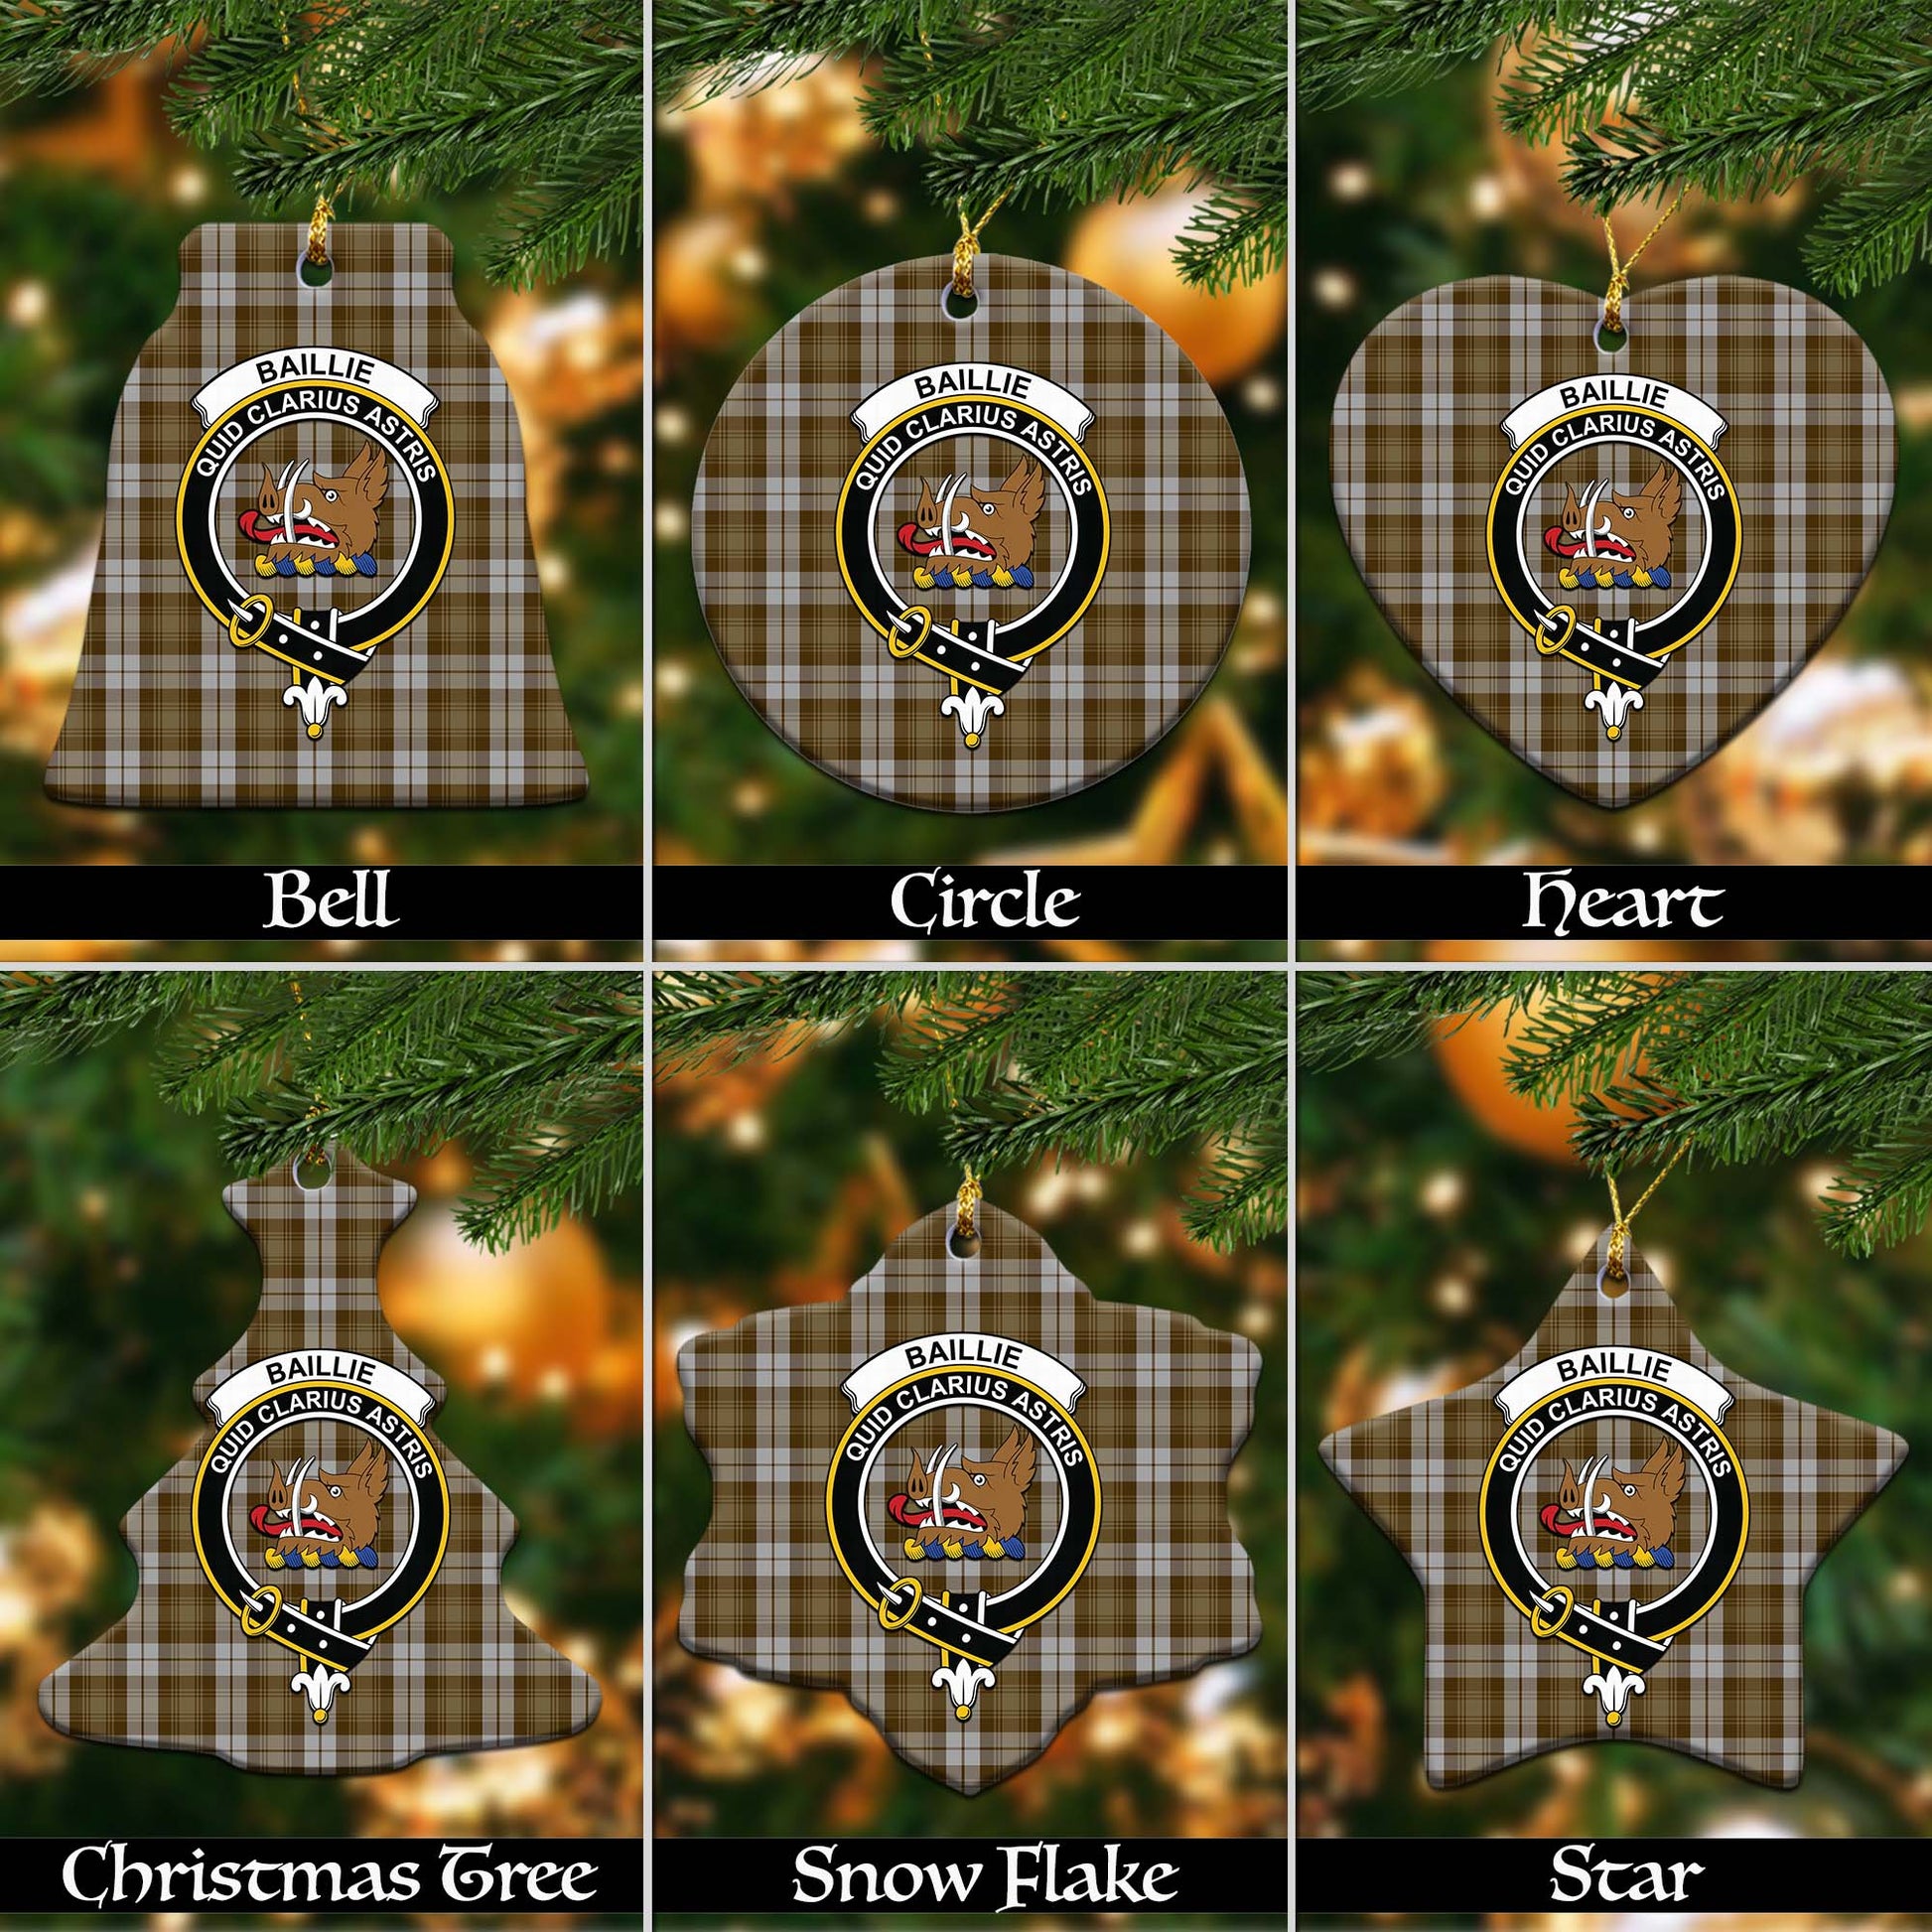 Baillie Dress Tartan Christmas Ornaments with Family Crest Ceramic Bell Pack 1: ornament * 1 piece - Tartanvibesclothing